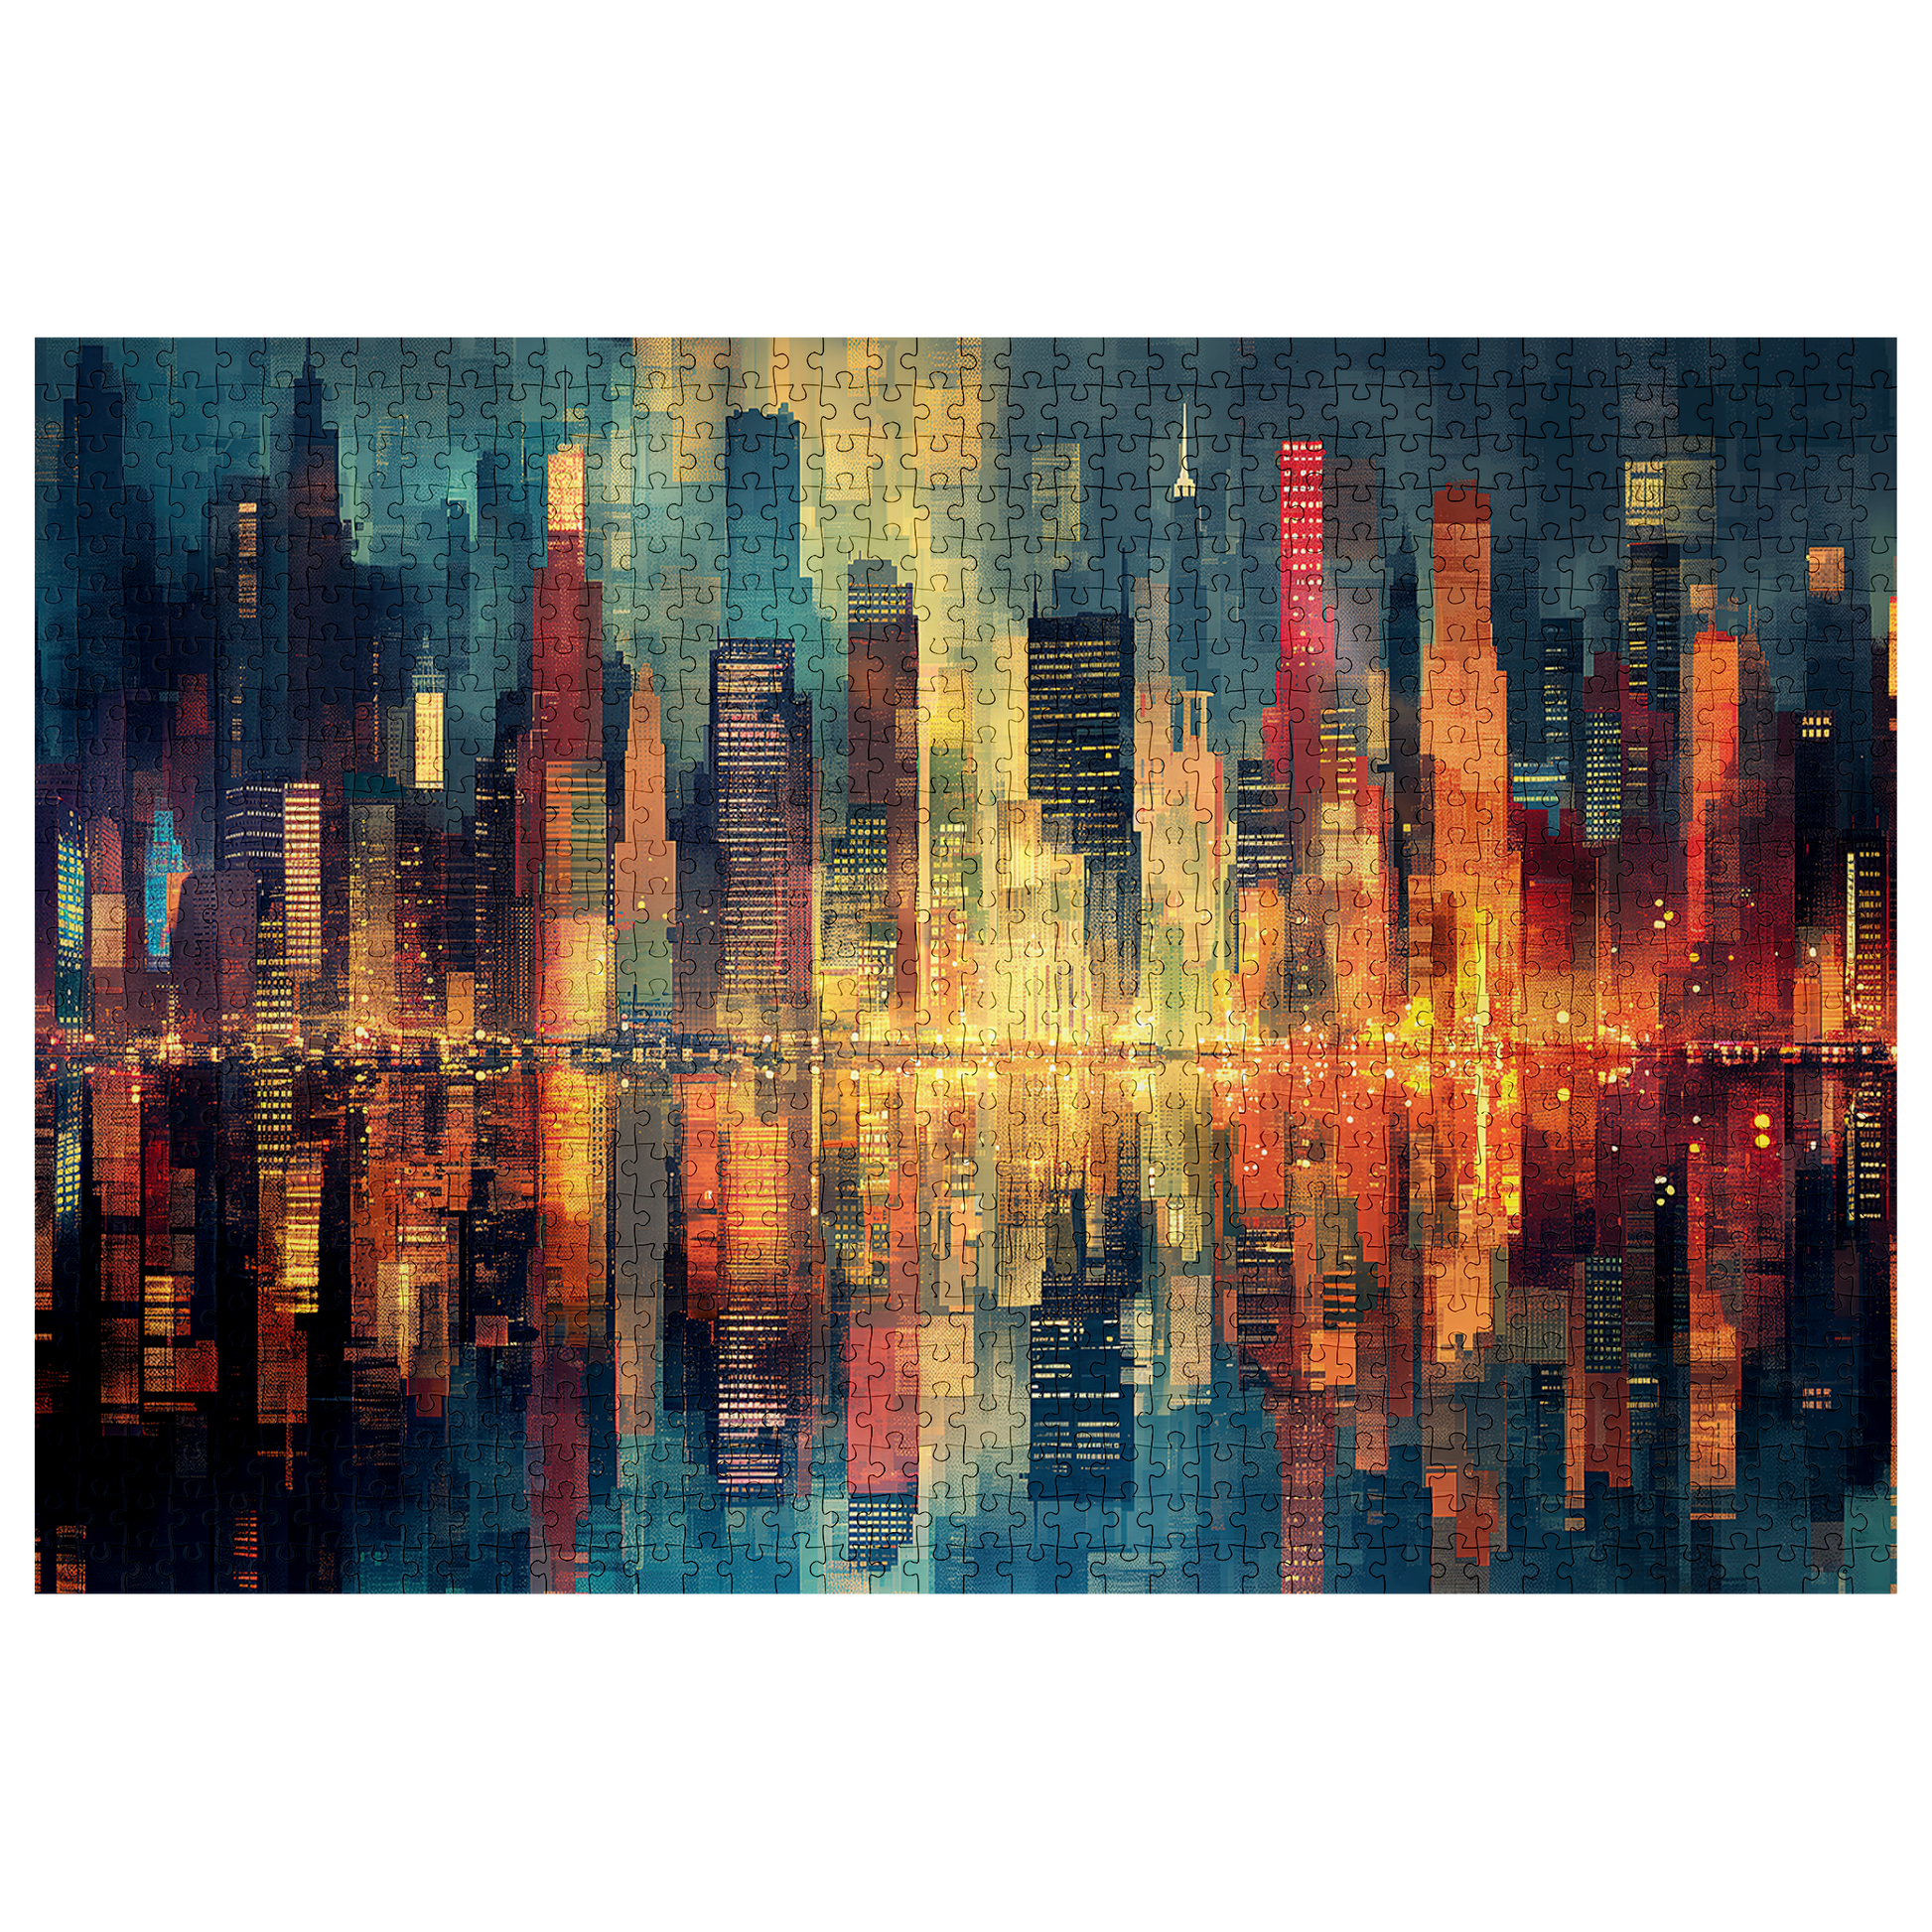 Reflections - Premium Jigsaw Puzzle - Dynamic, Cityscape, Skyscrapers, Waterfront - Multiple Sizes Available